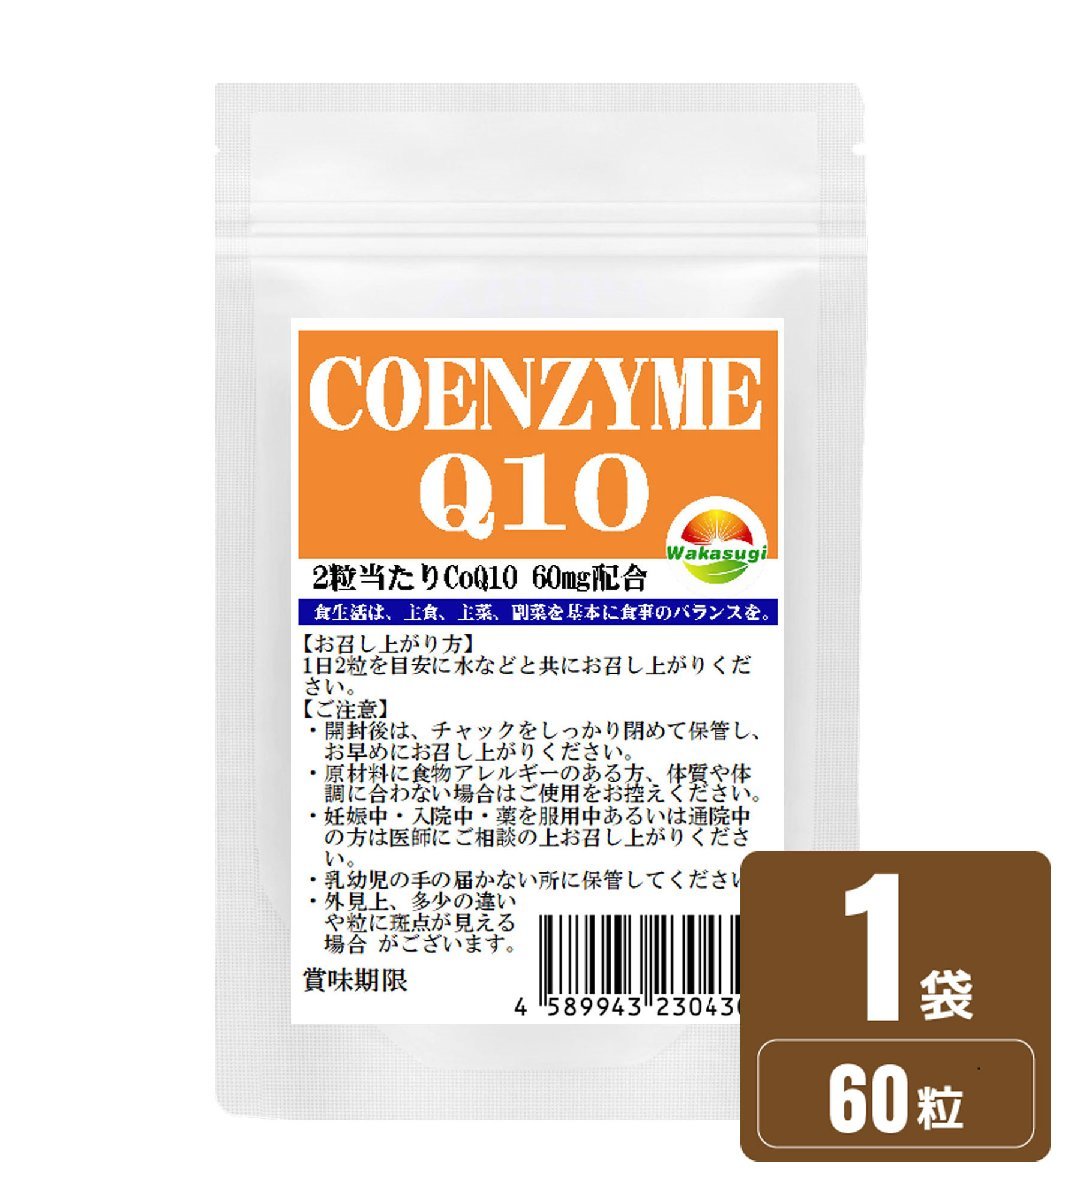  coenzyme Q10 supplement 60 bead approximately 1. month minute 2 bead per CoQ10 60mg combination combination burning series supplement. carnitine .α lipoic acid . affinity eminent . enzyme burning series 